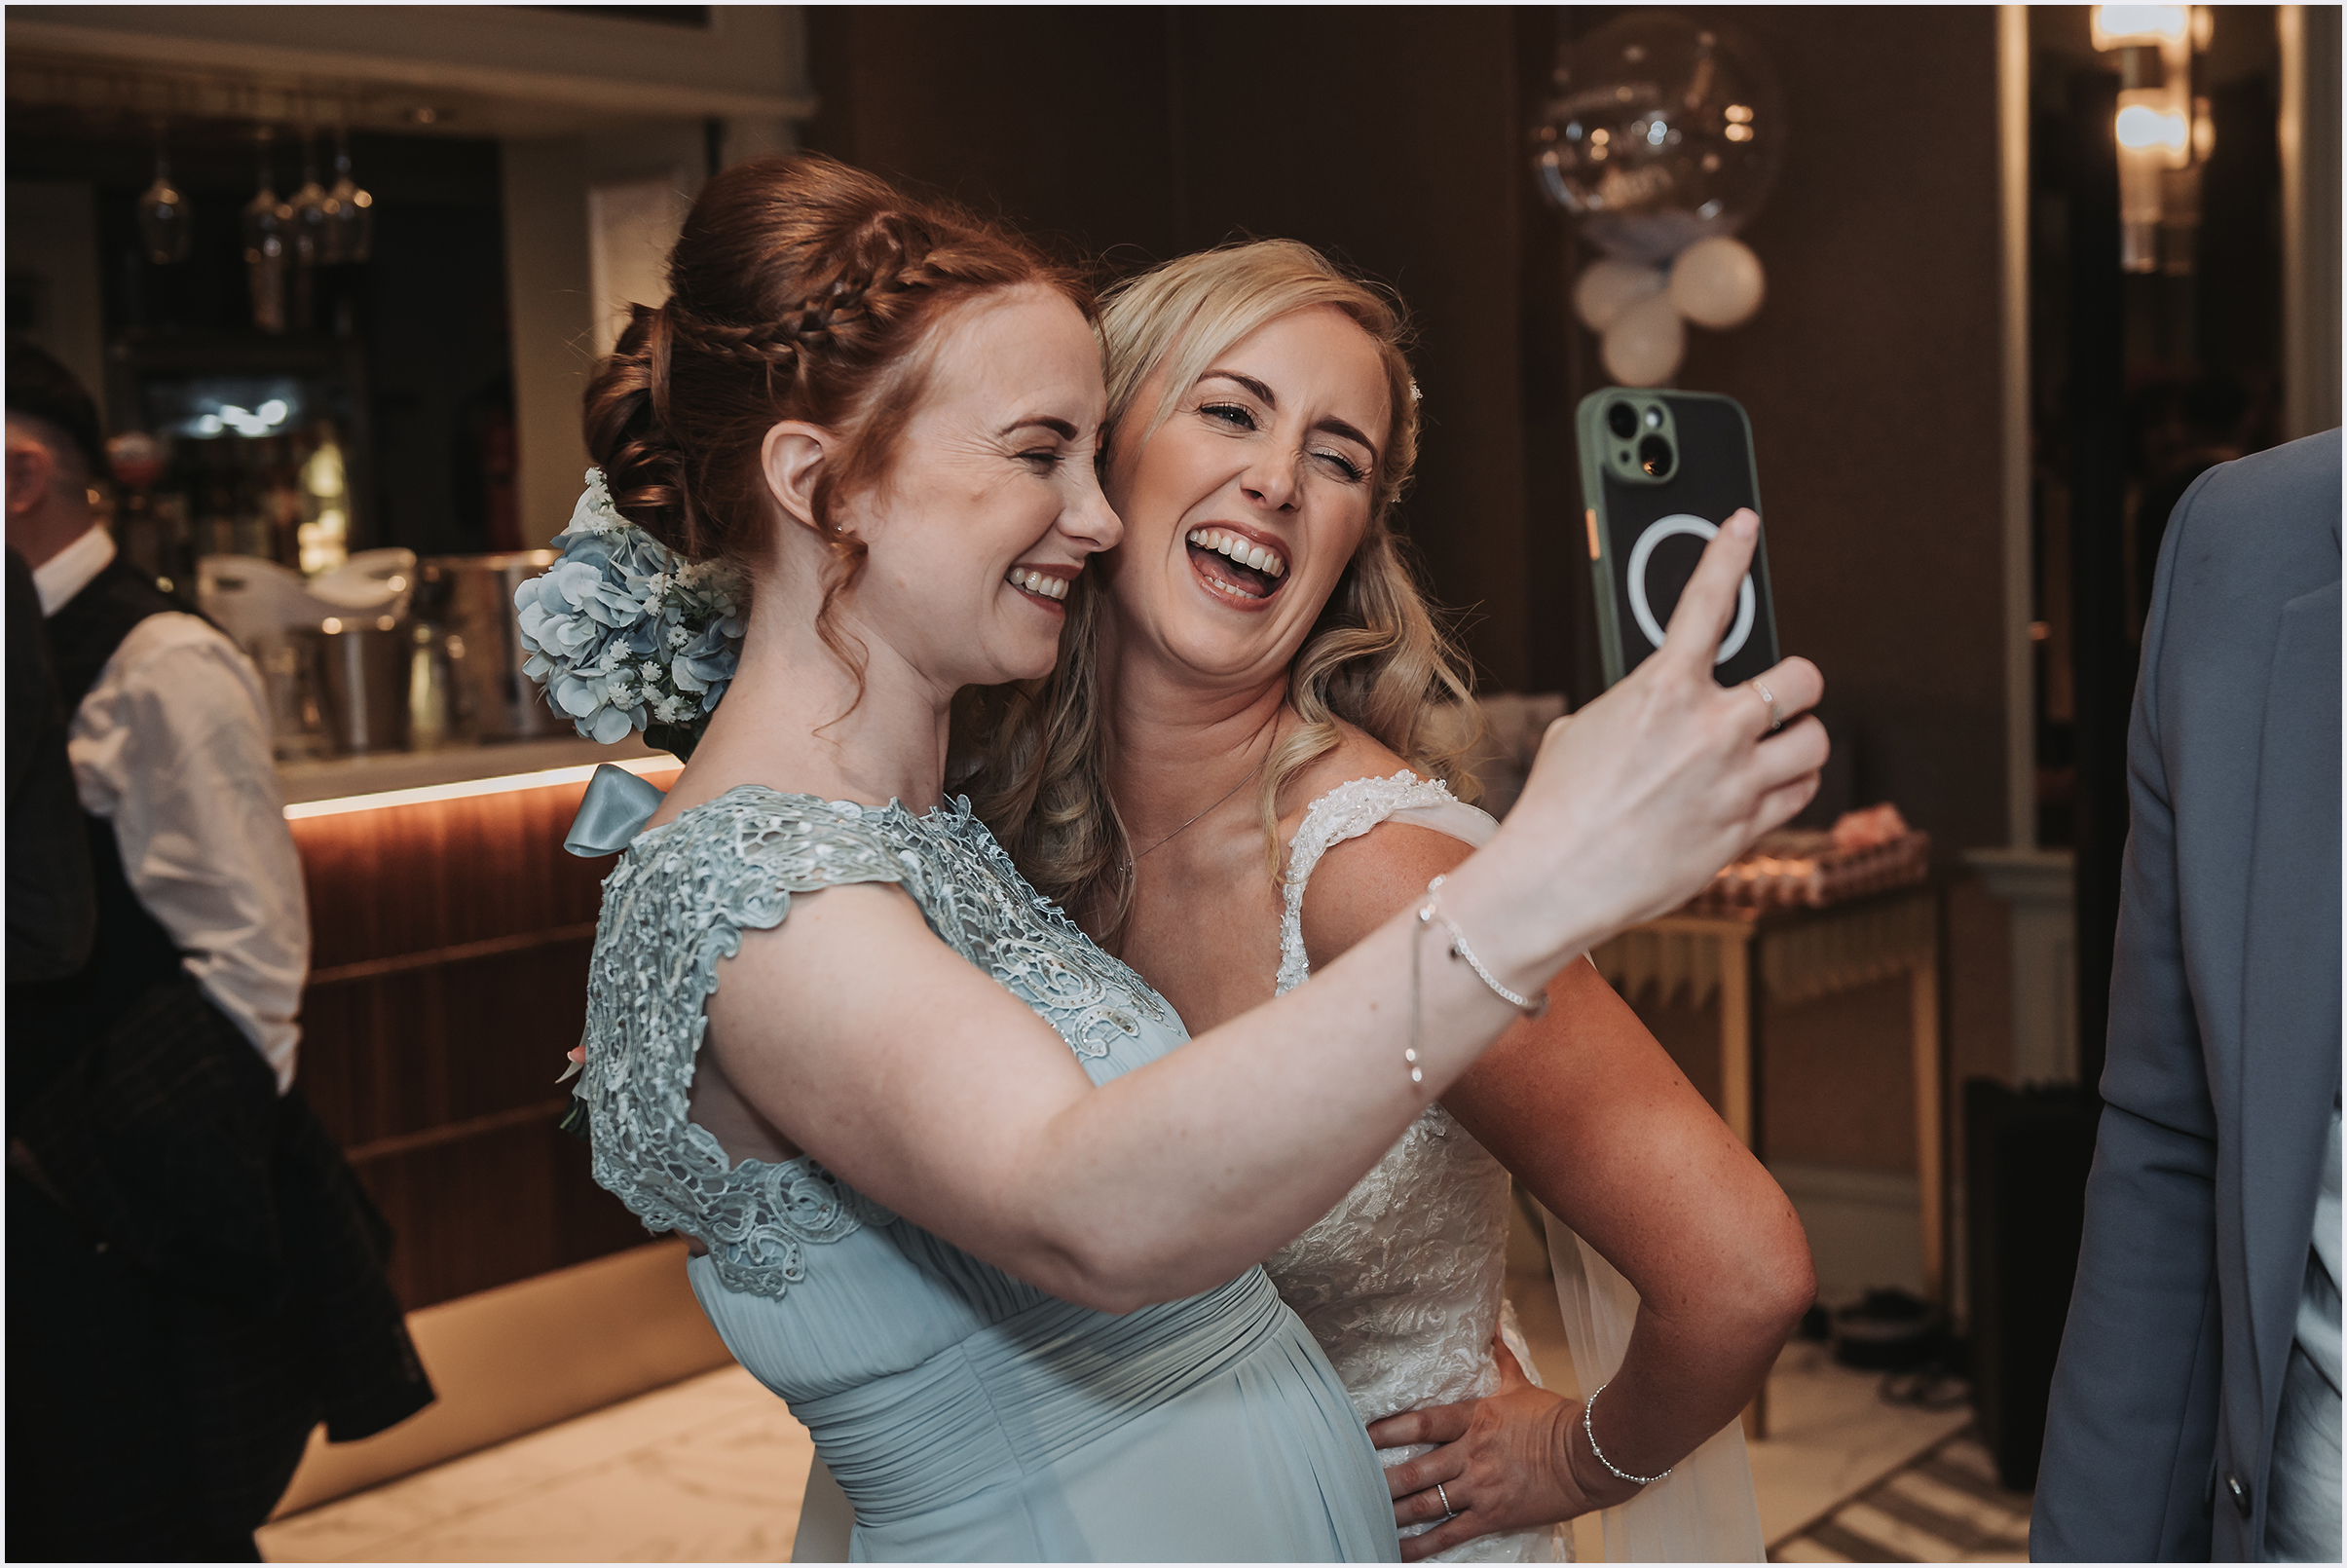 A bride and her bridesmaid pulling faces while taking a selfie during the drinks reception at a wedding at The Grosveor Pulford Hotel and Spa.